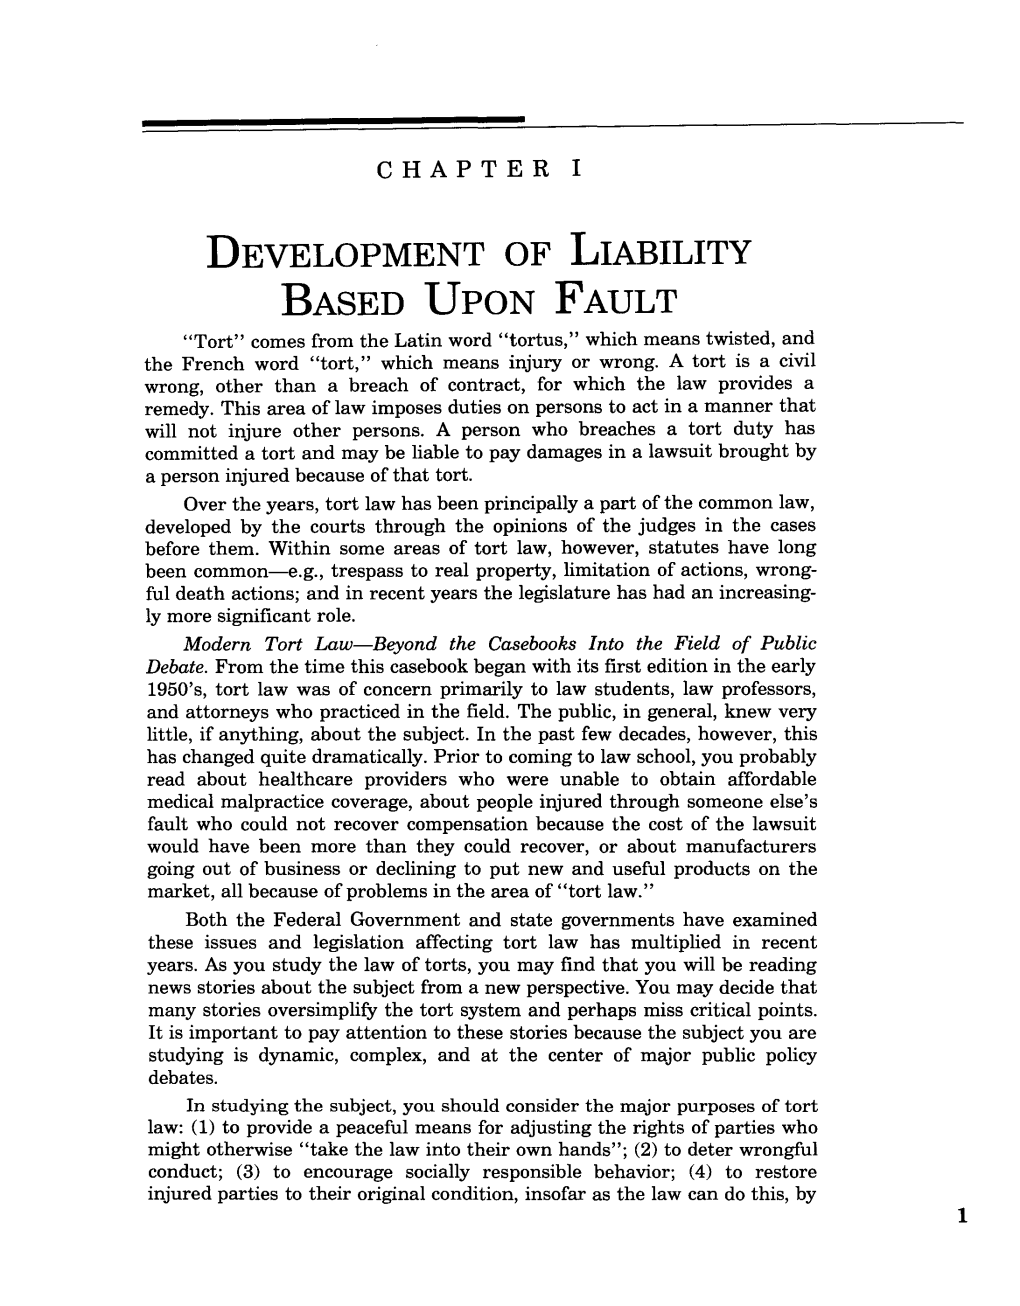 DEVELOPMENT of LIABILITY BASED UPON FAULT "Tort" Comes from the Latin Word "Tortus," Which Means Twisted, and the French Word "Tort," Which Means Injury Or Wrong